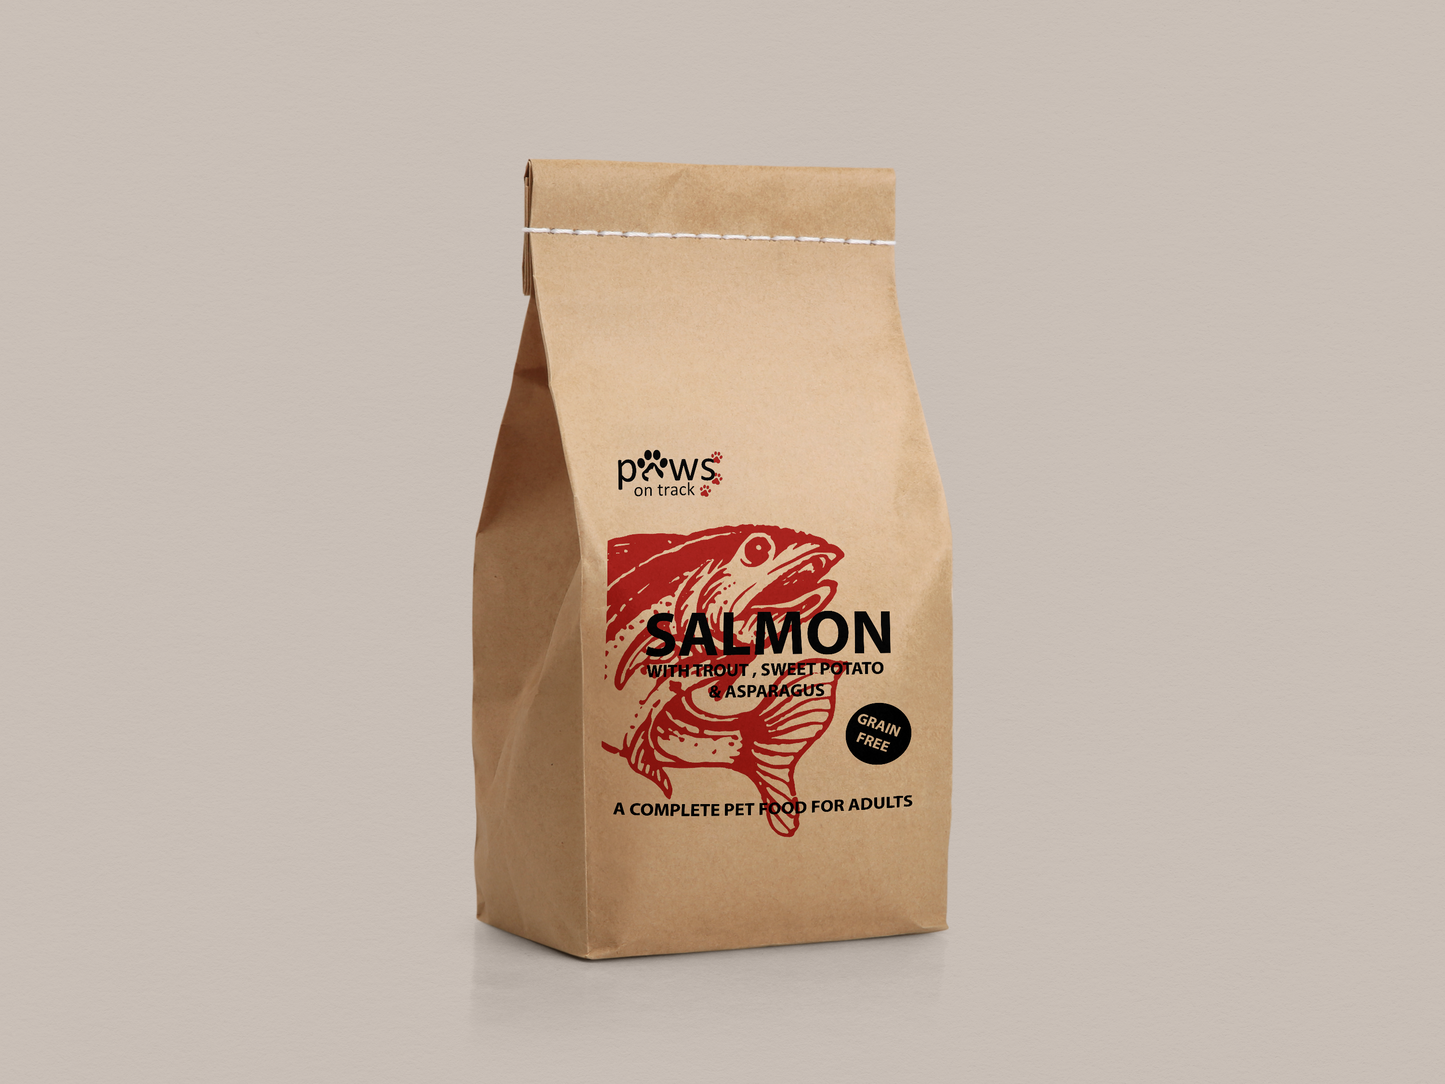 Salmon Dry Food - 2kg by Paws on Track